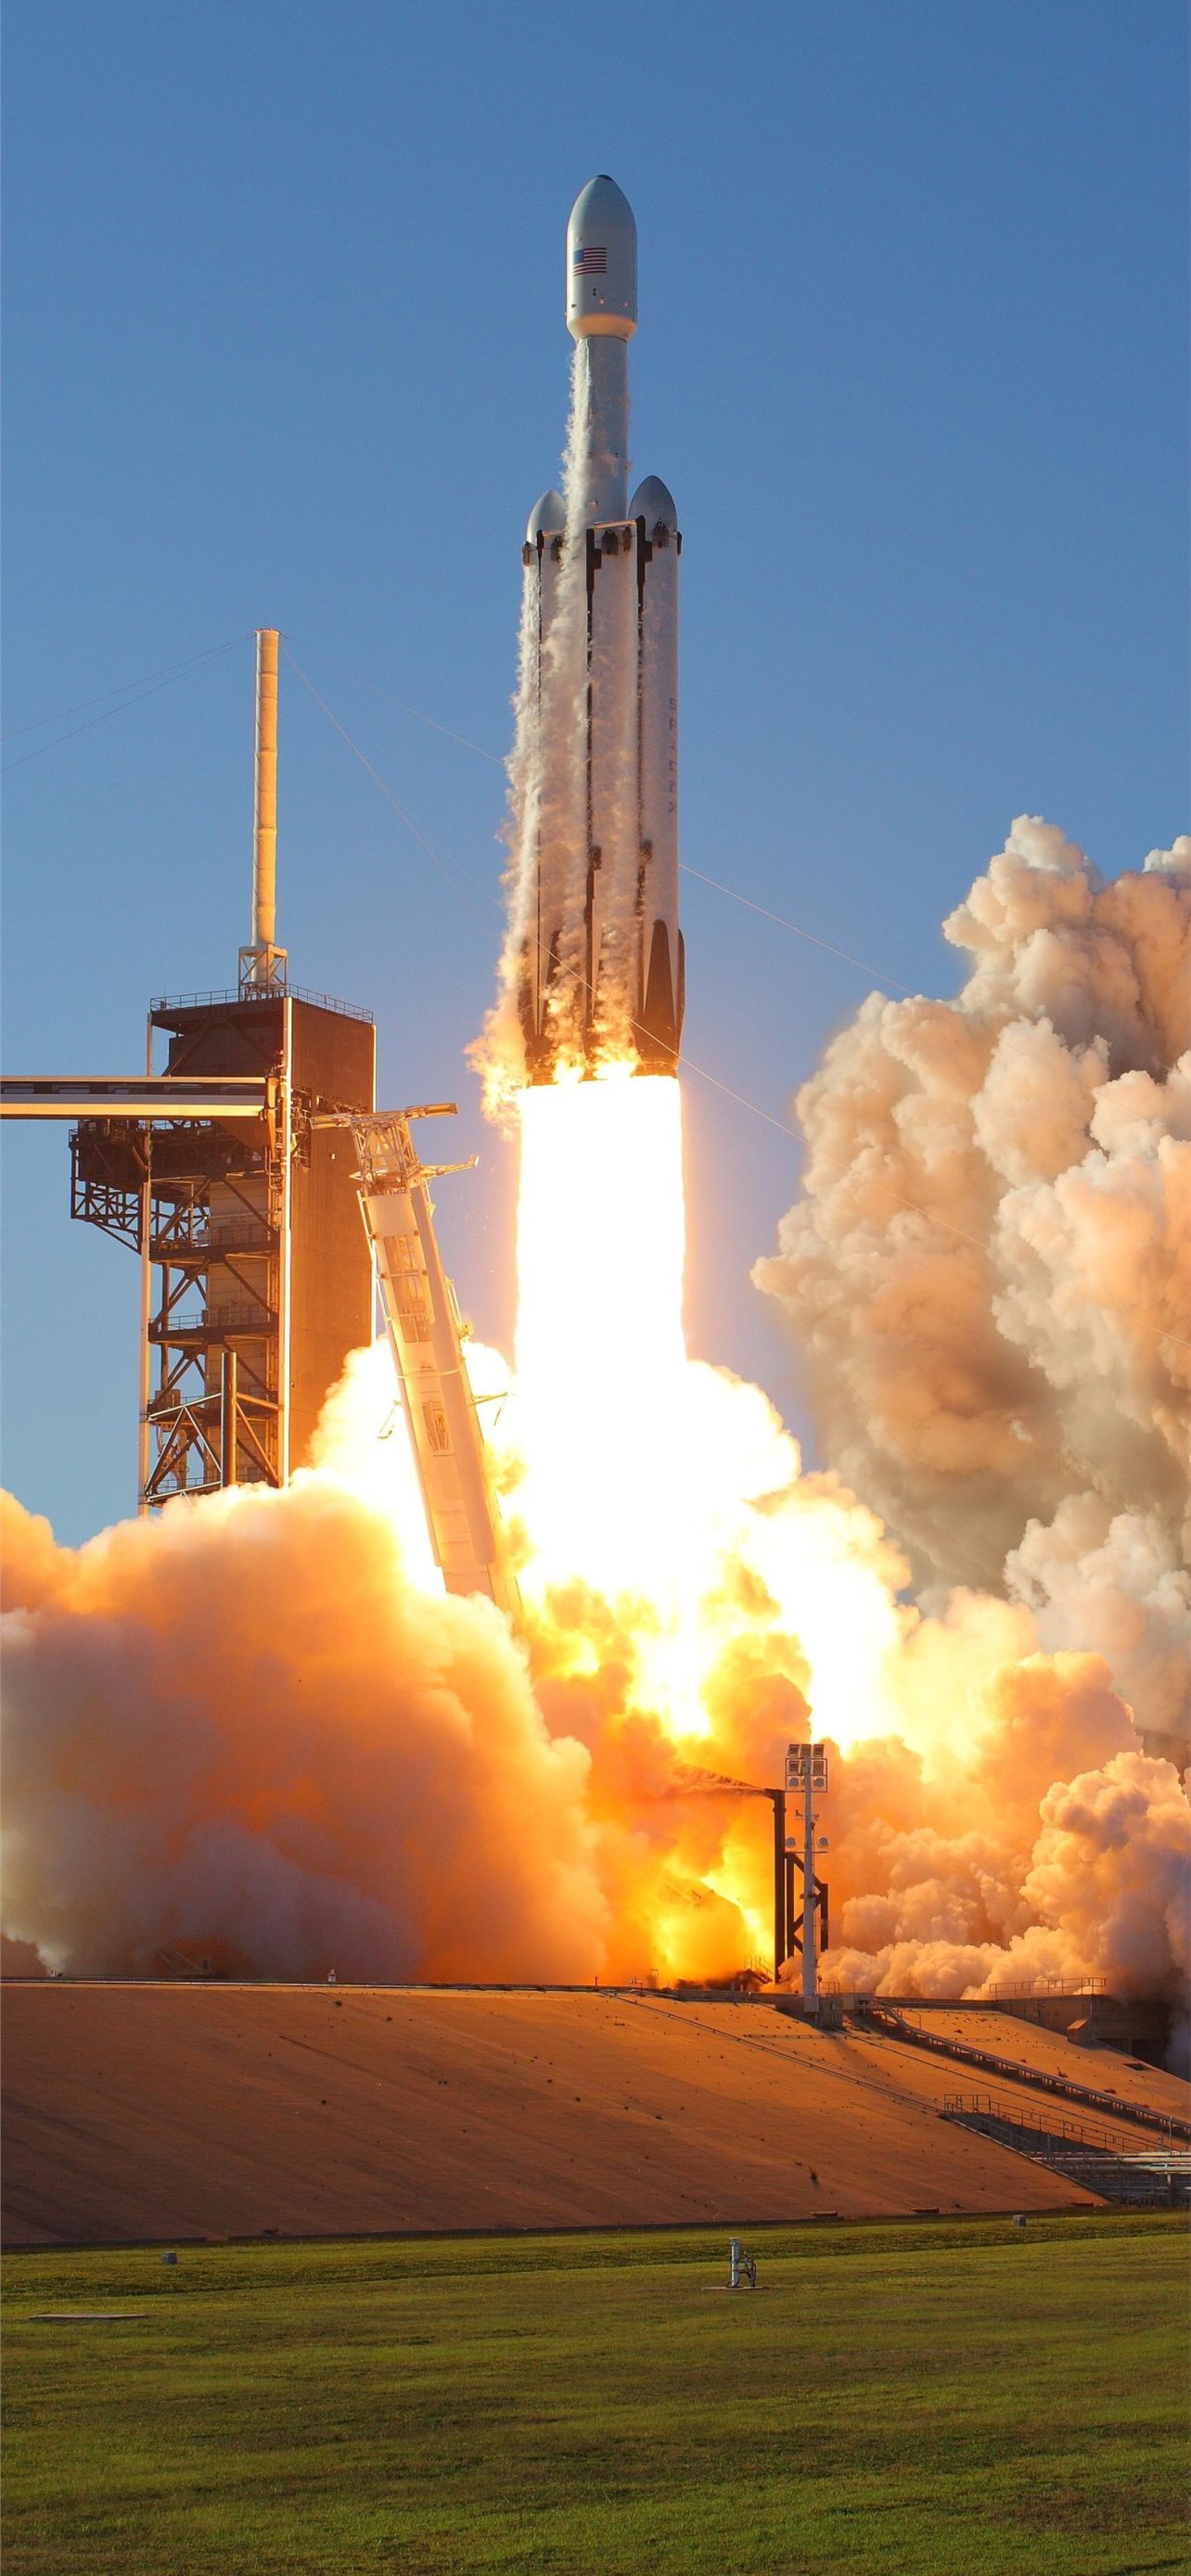 Spacex HD wallpapers  Pxfuel